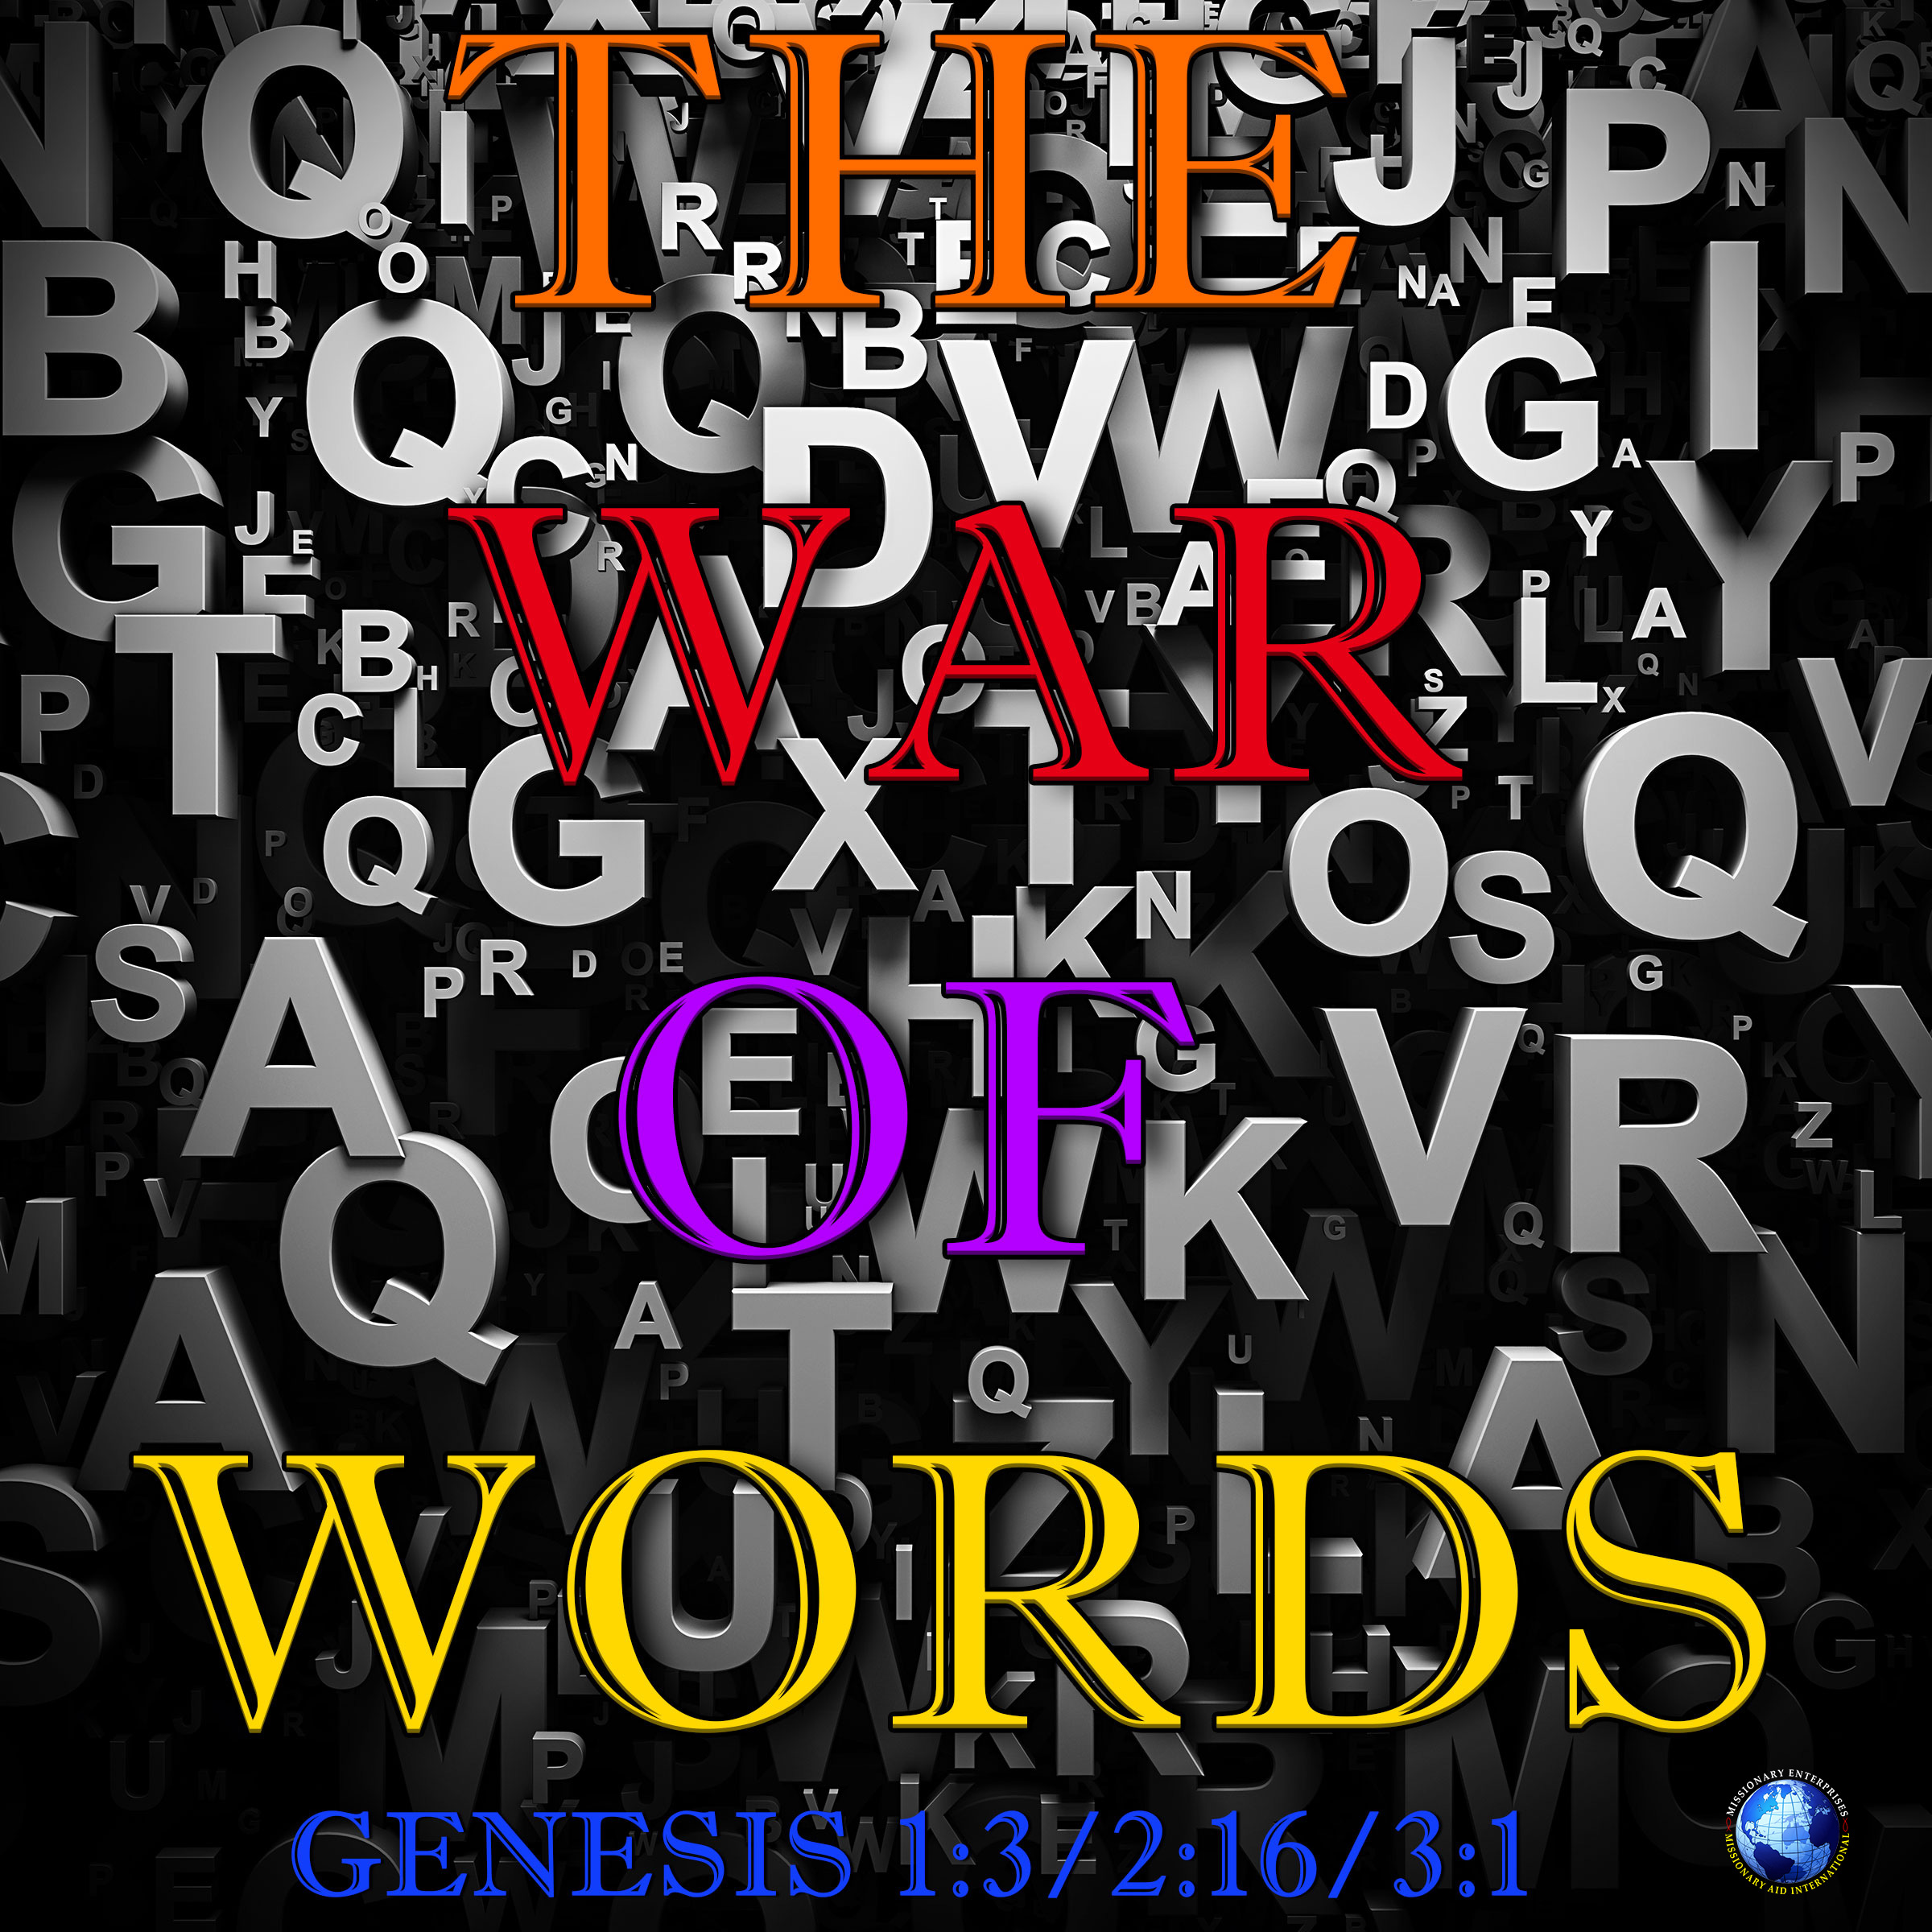 The War Of Words